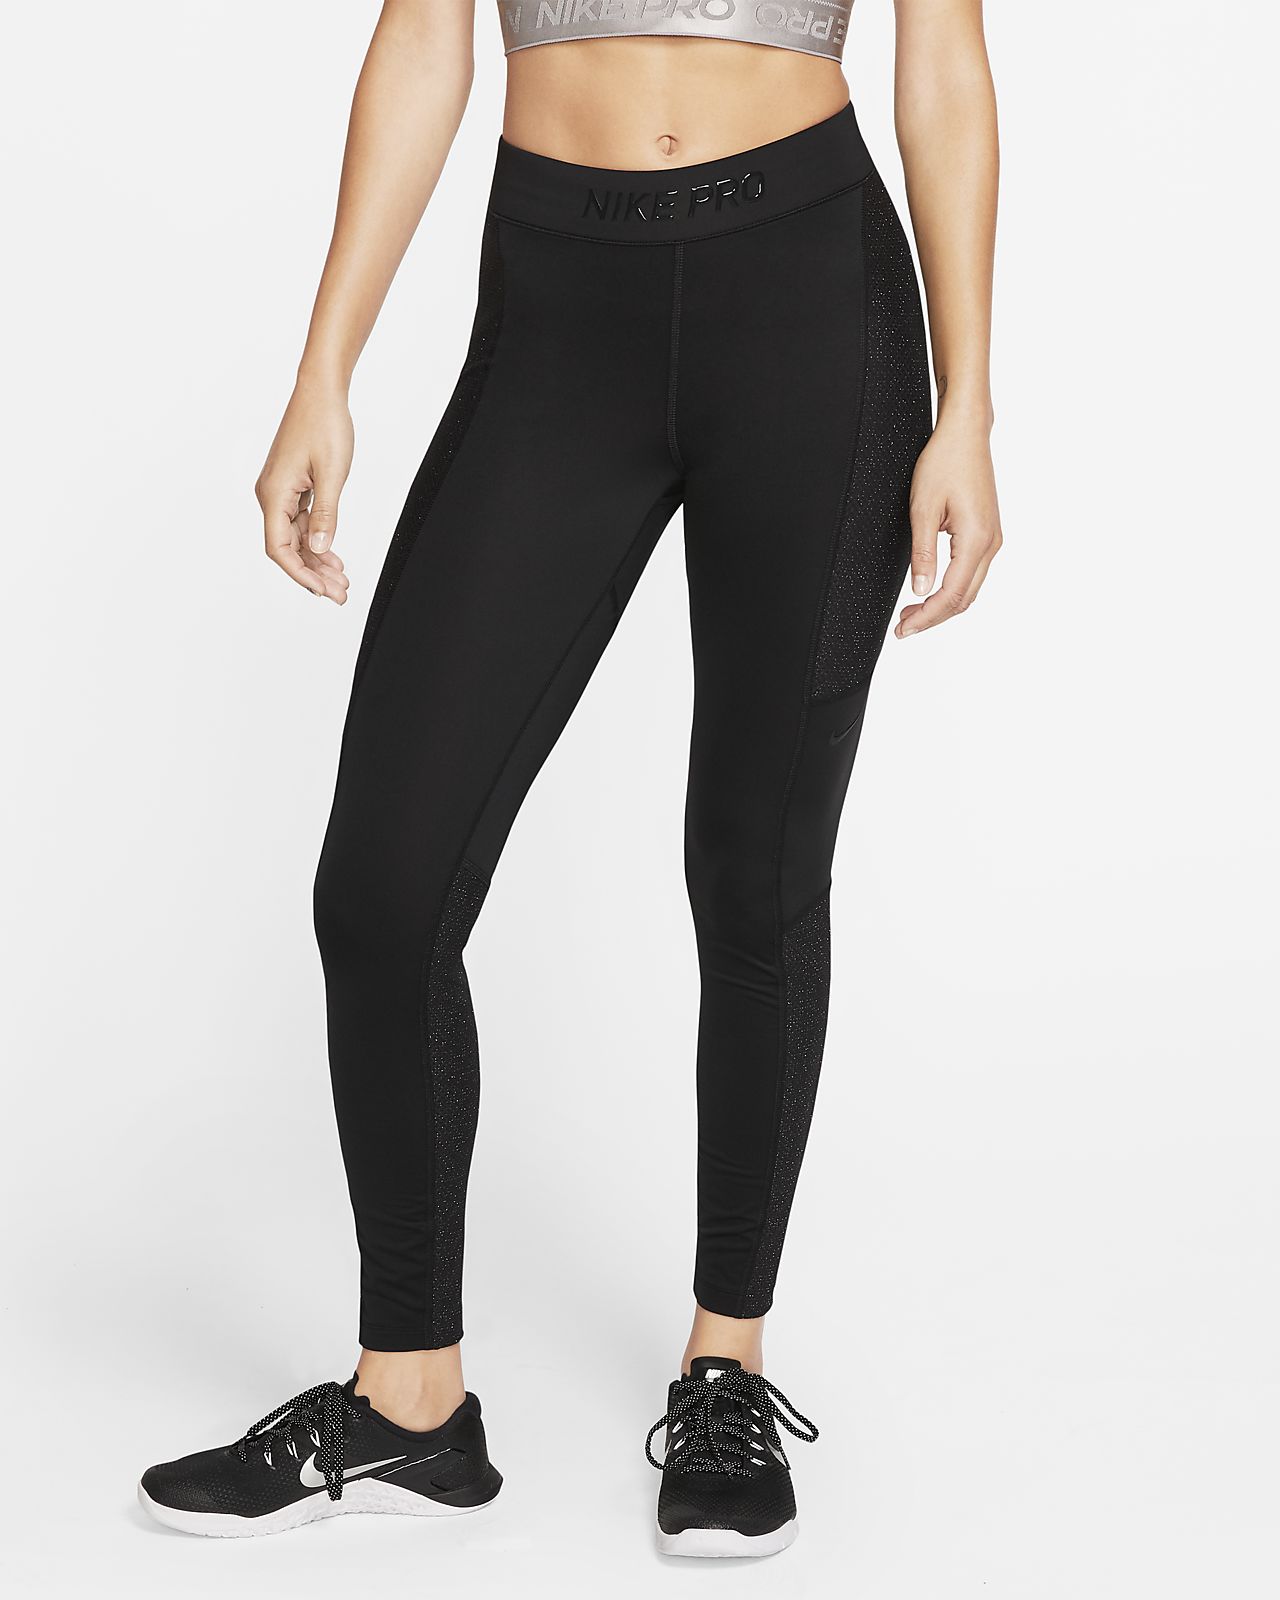 buy \u003e nike pro warm tights, Up to 75% OFF